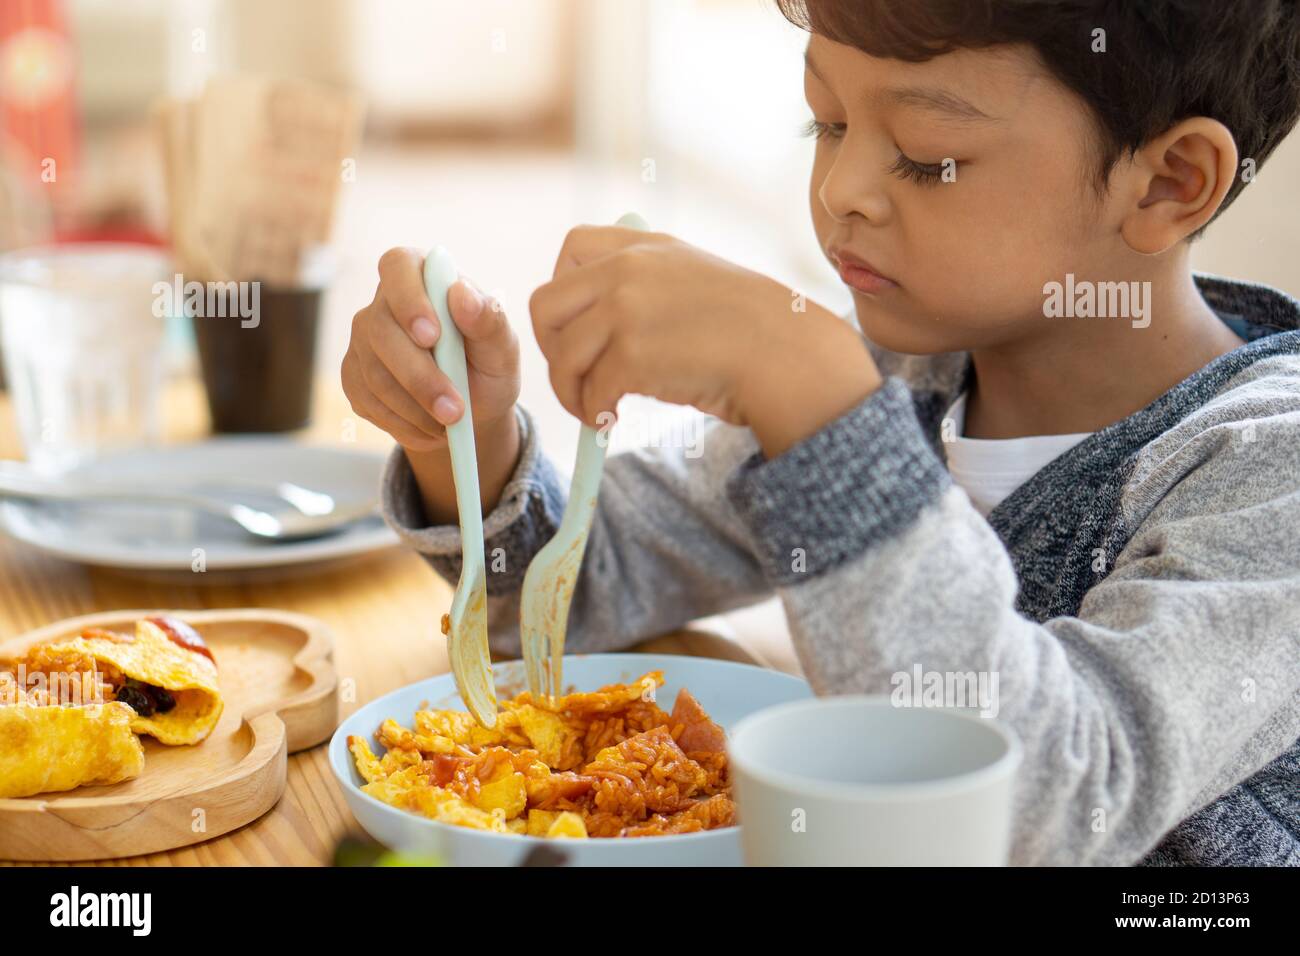 The child eats an omelet wrapped in fried rice with bacon sauce inside. Stock Photo